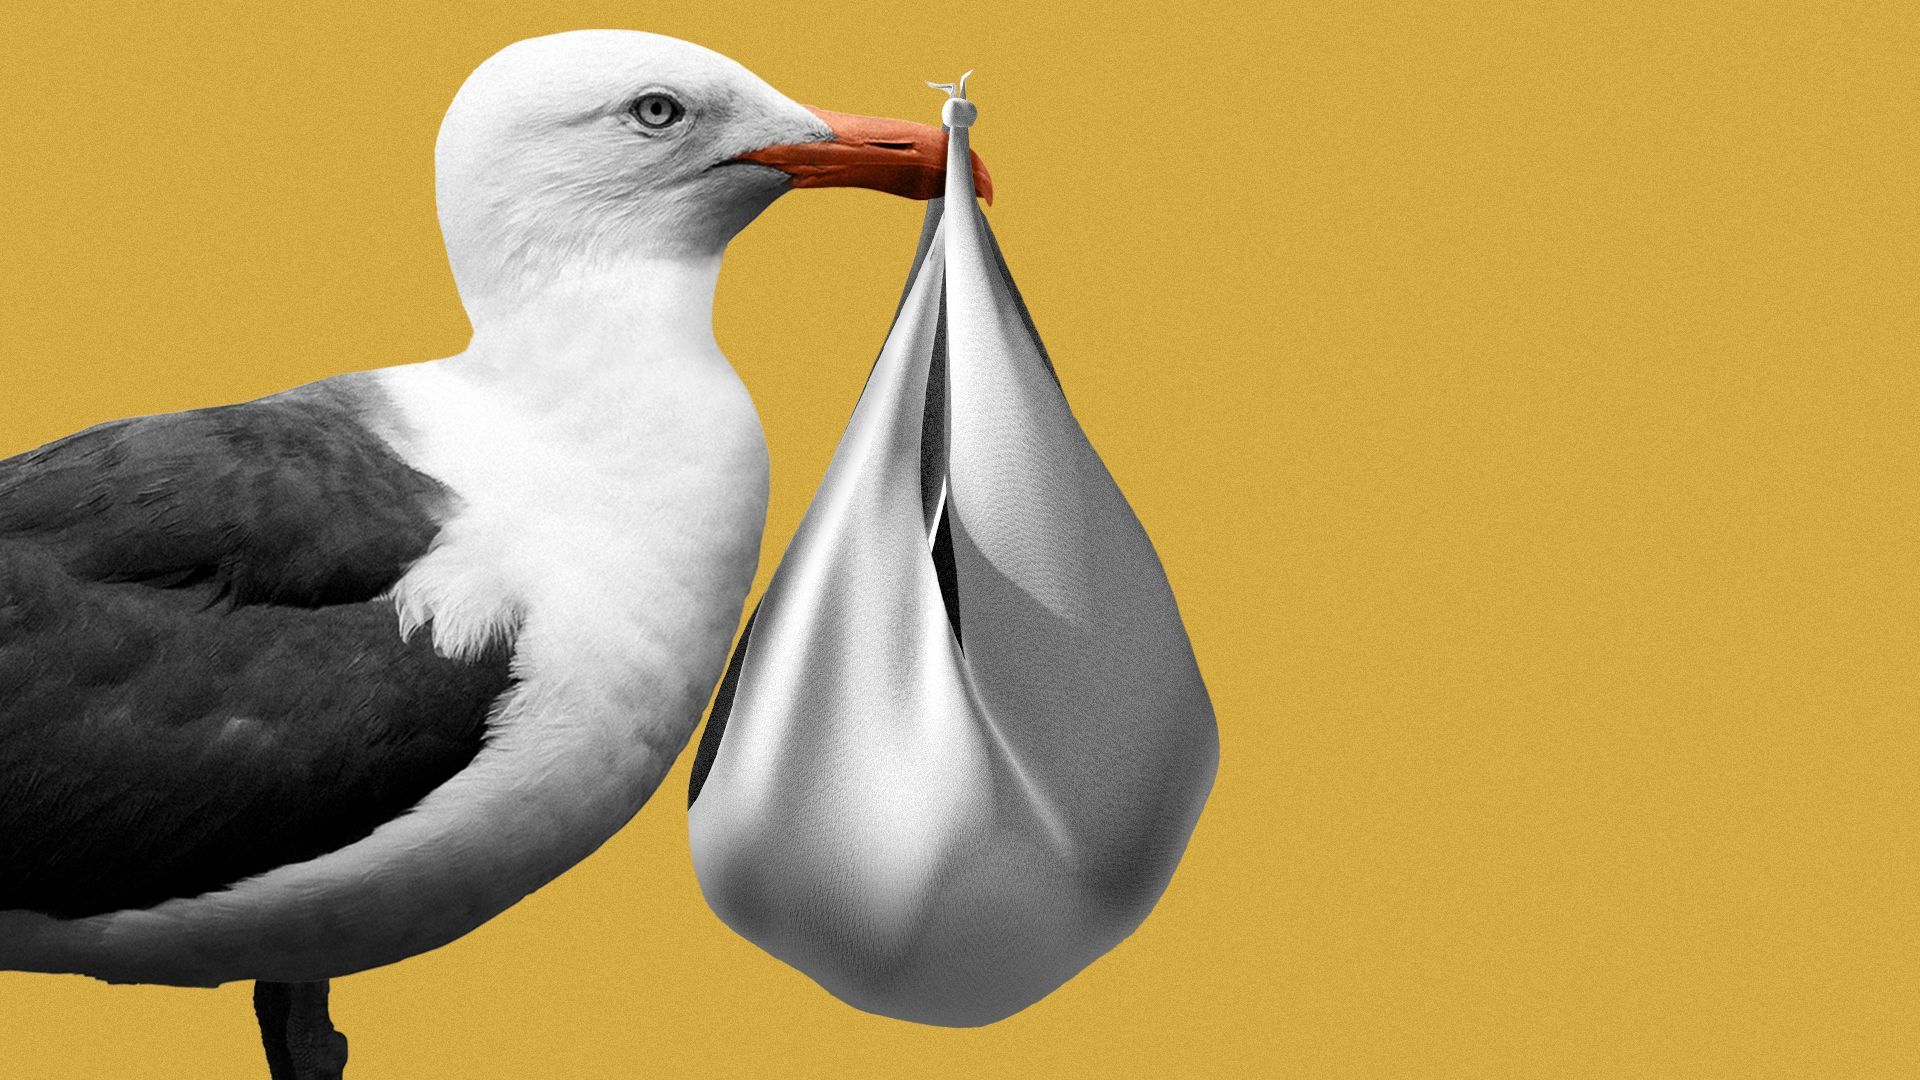 Illustration of a seagull holding a baby bundle.